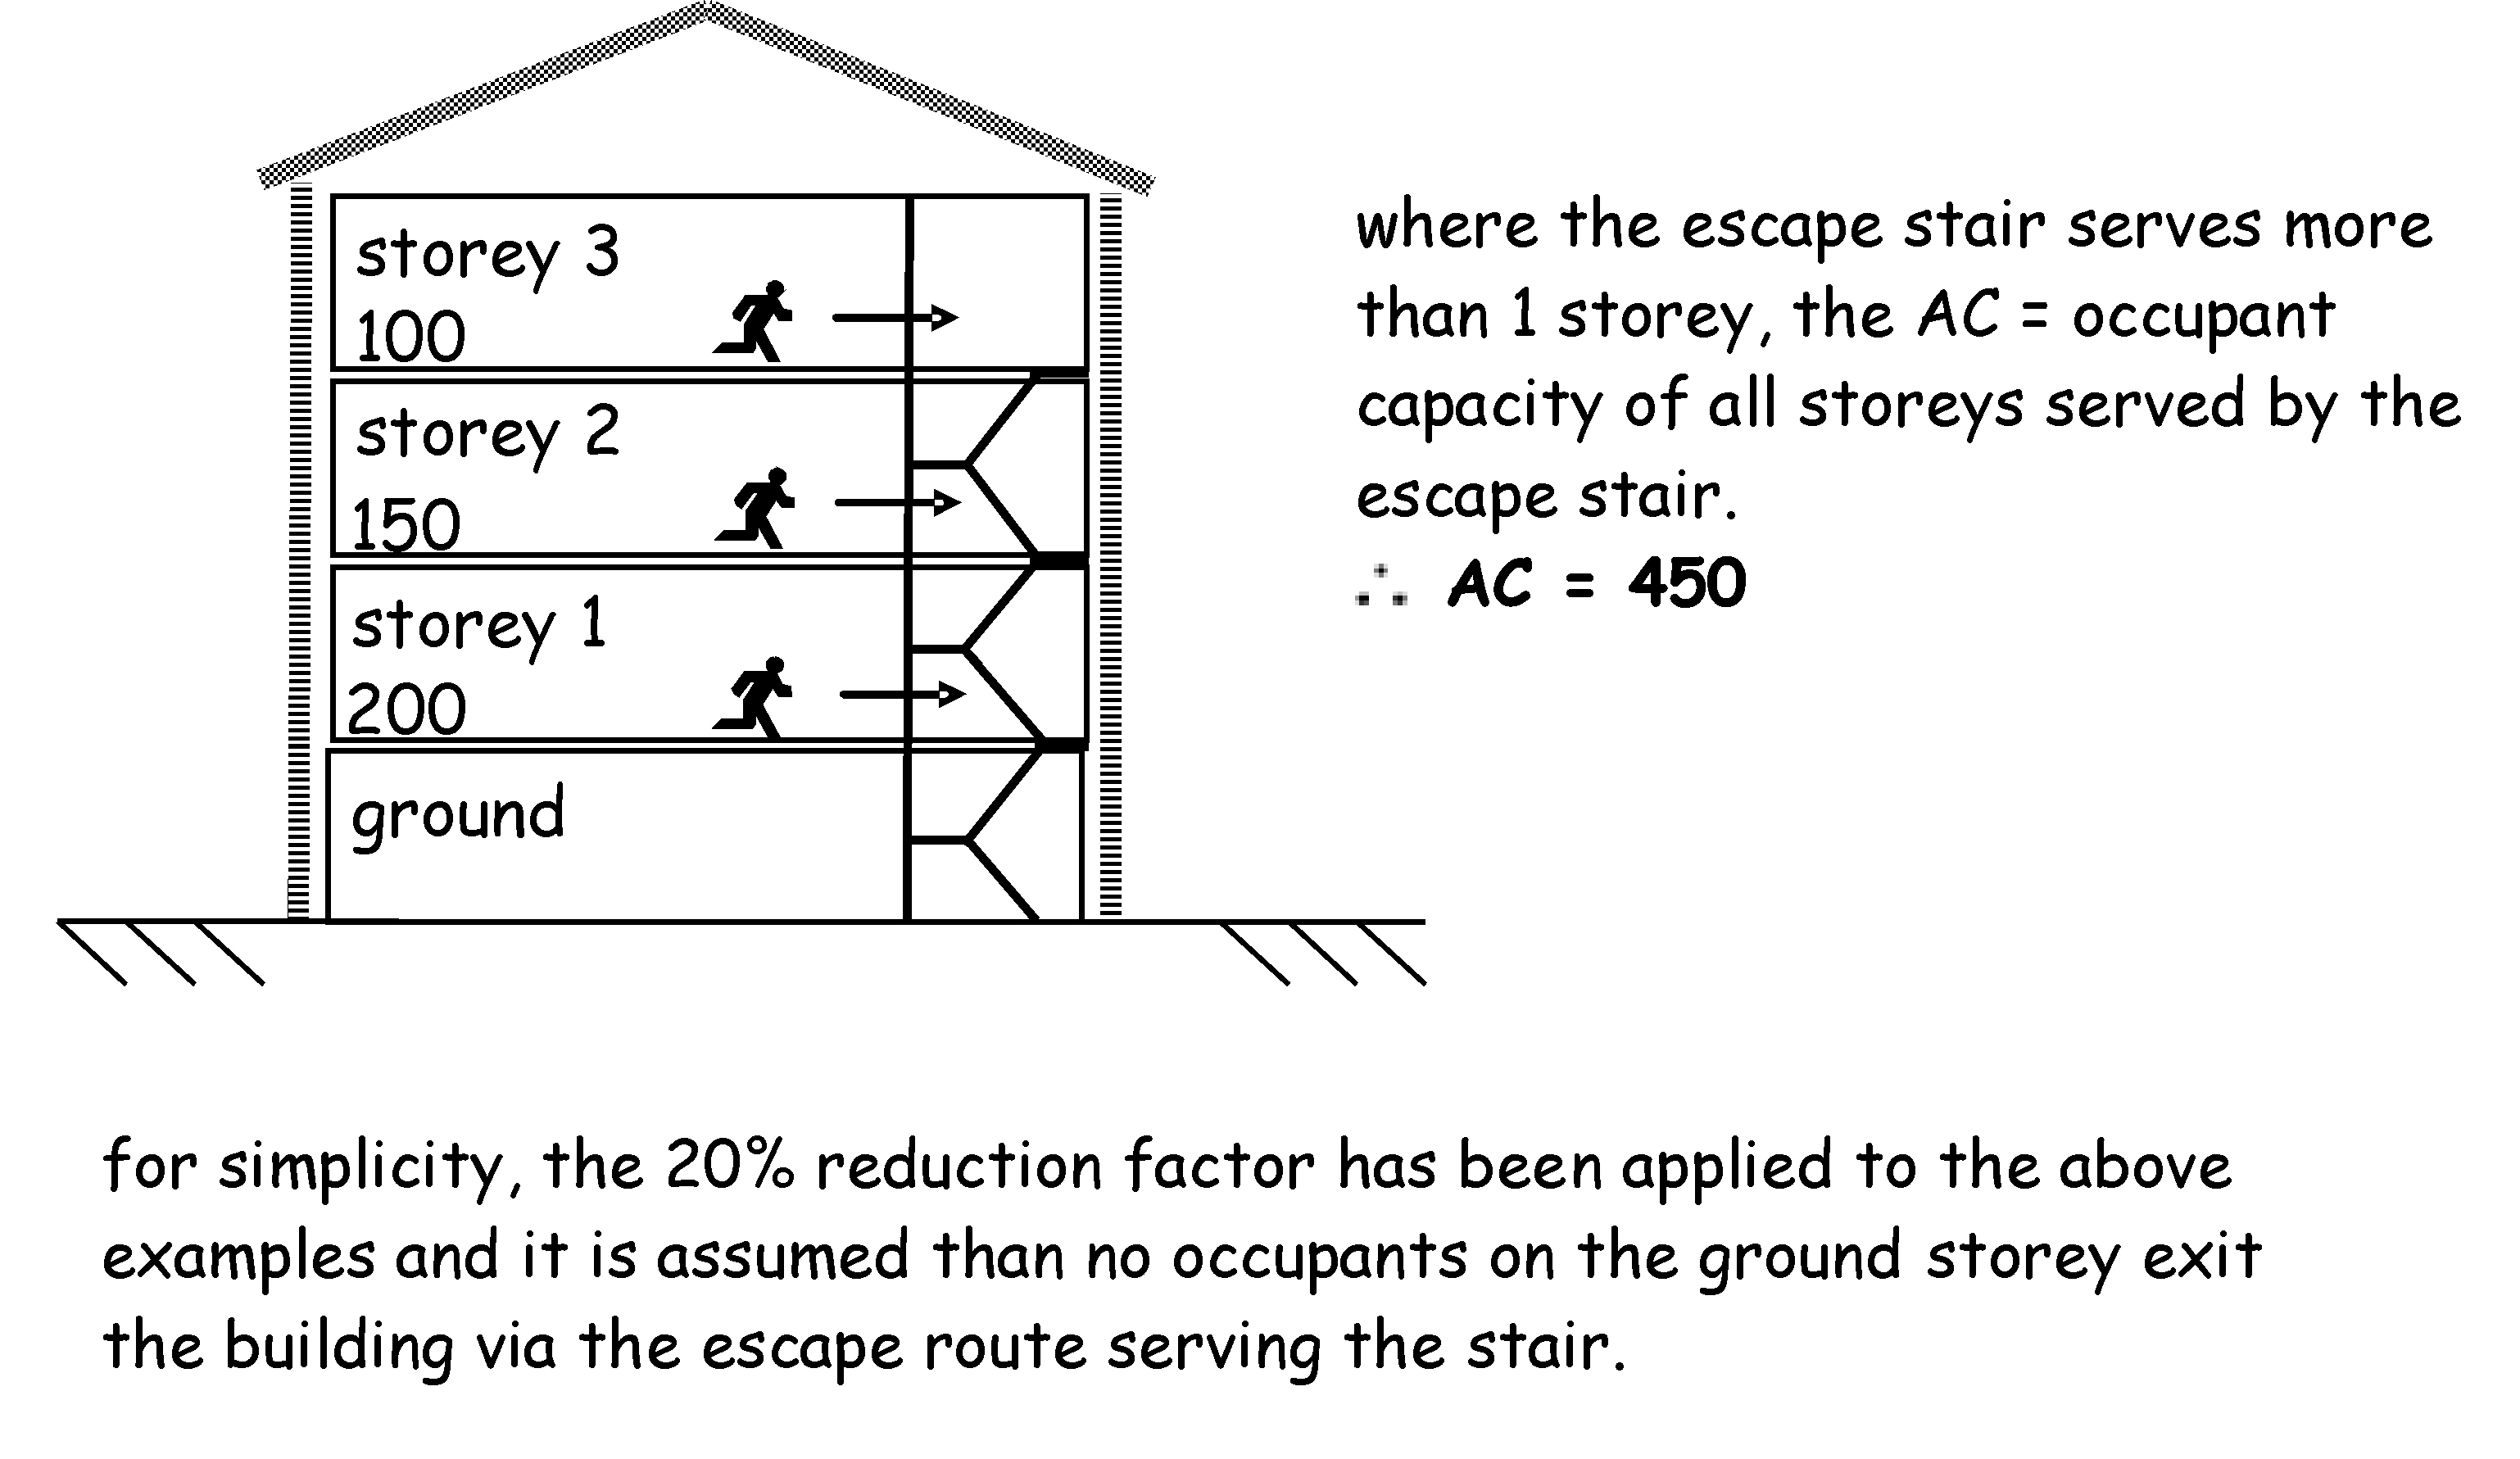 More than one storey example